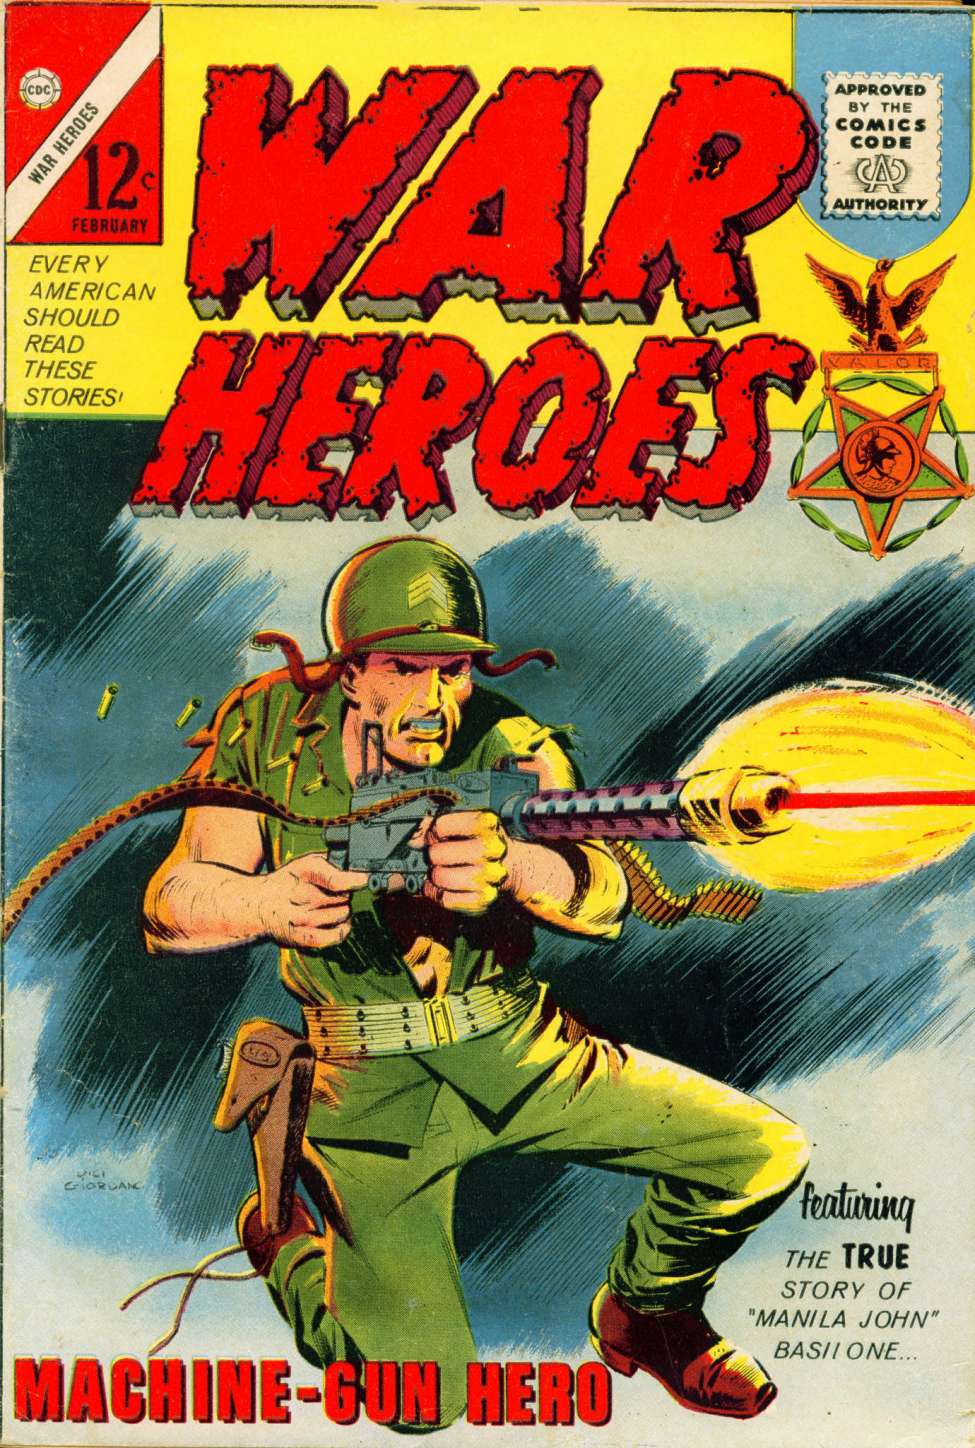 Comic Book Cover For War Heroes 1